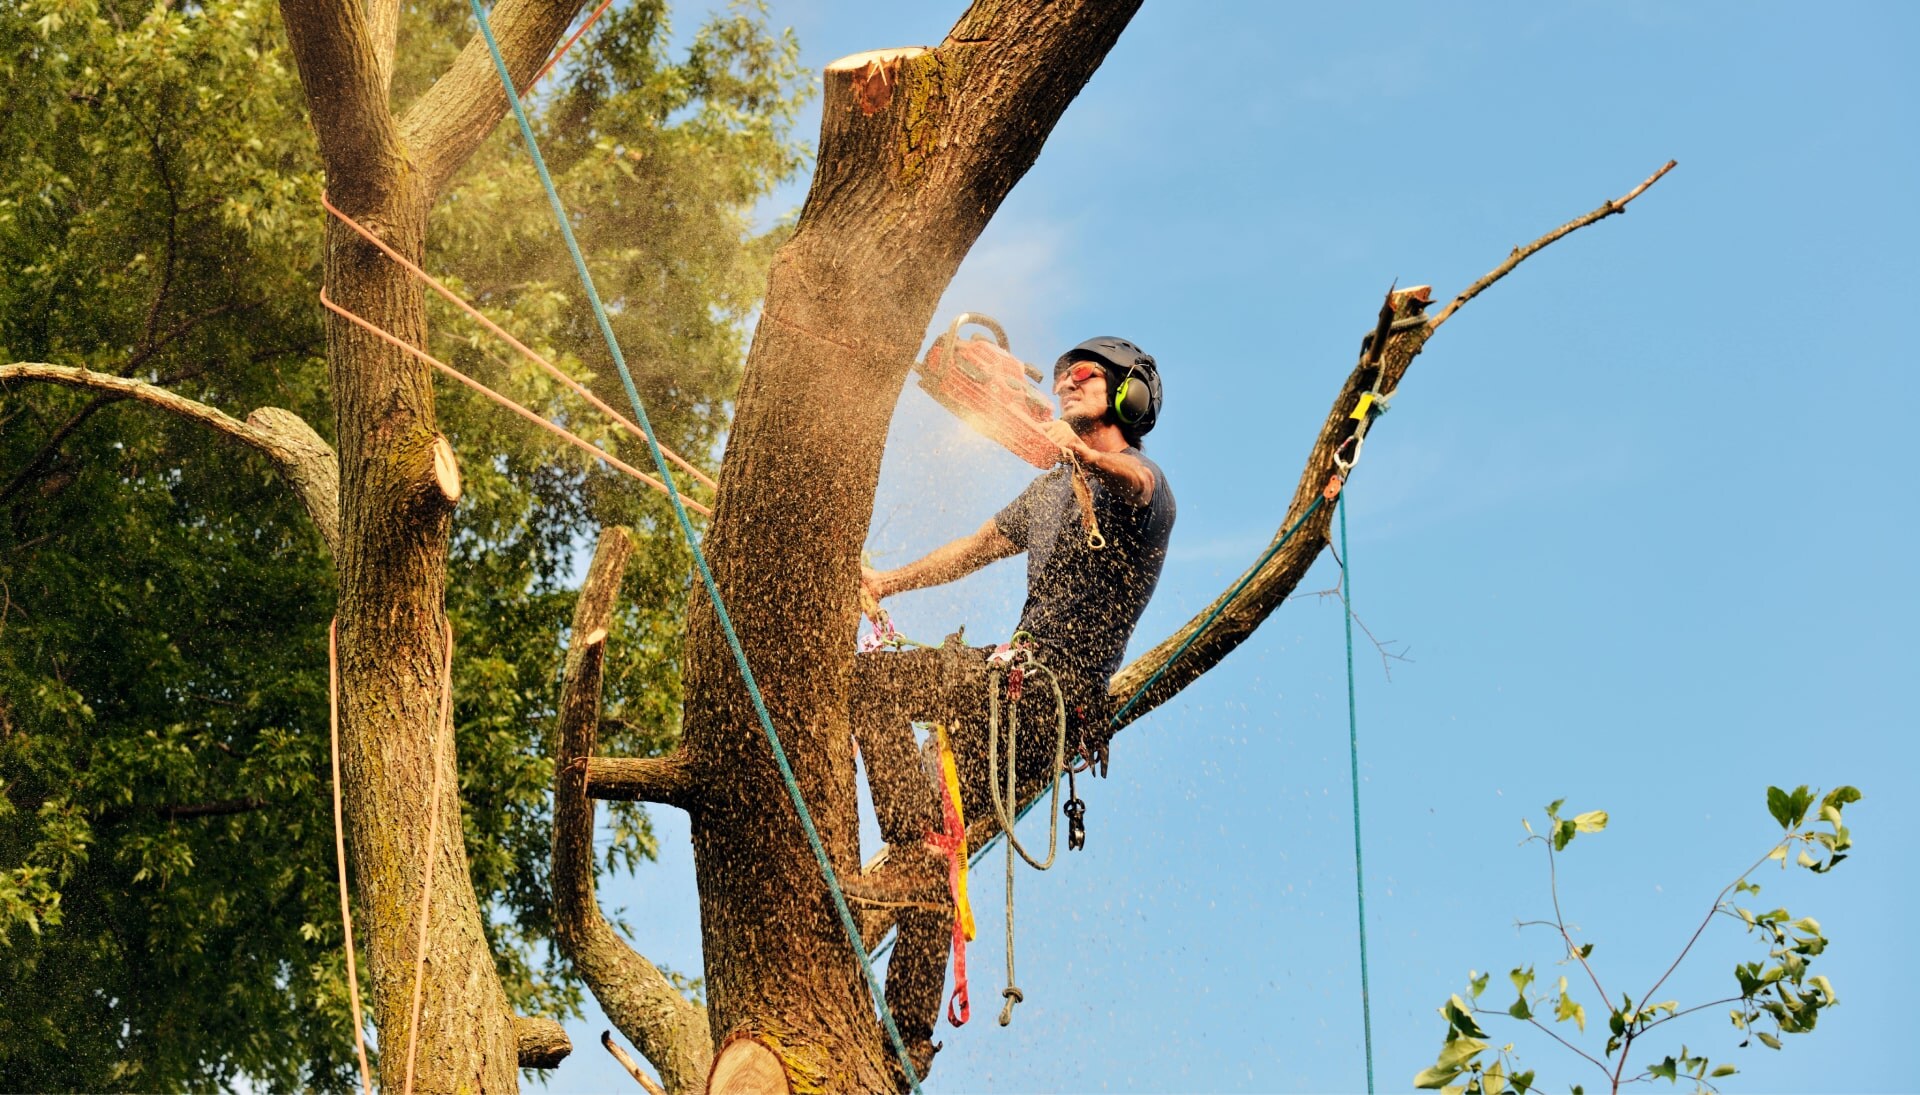 Arlington tree removal experts solve tree issues.